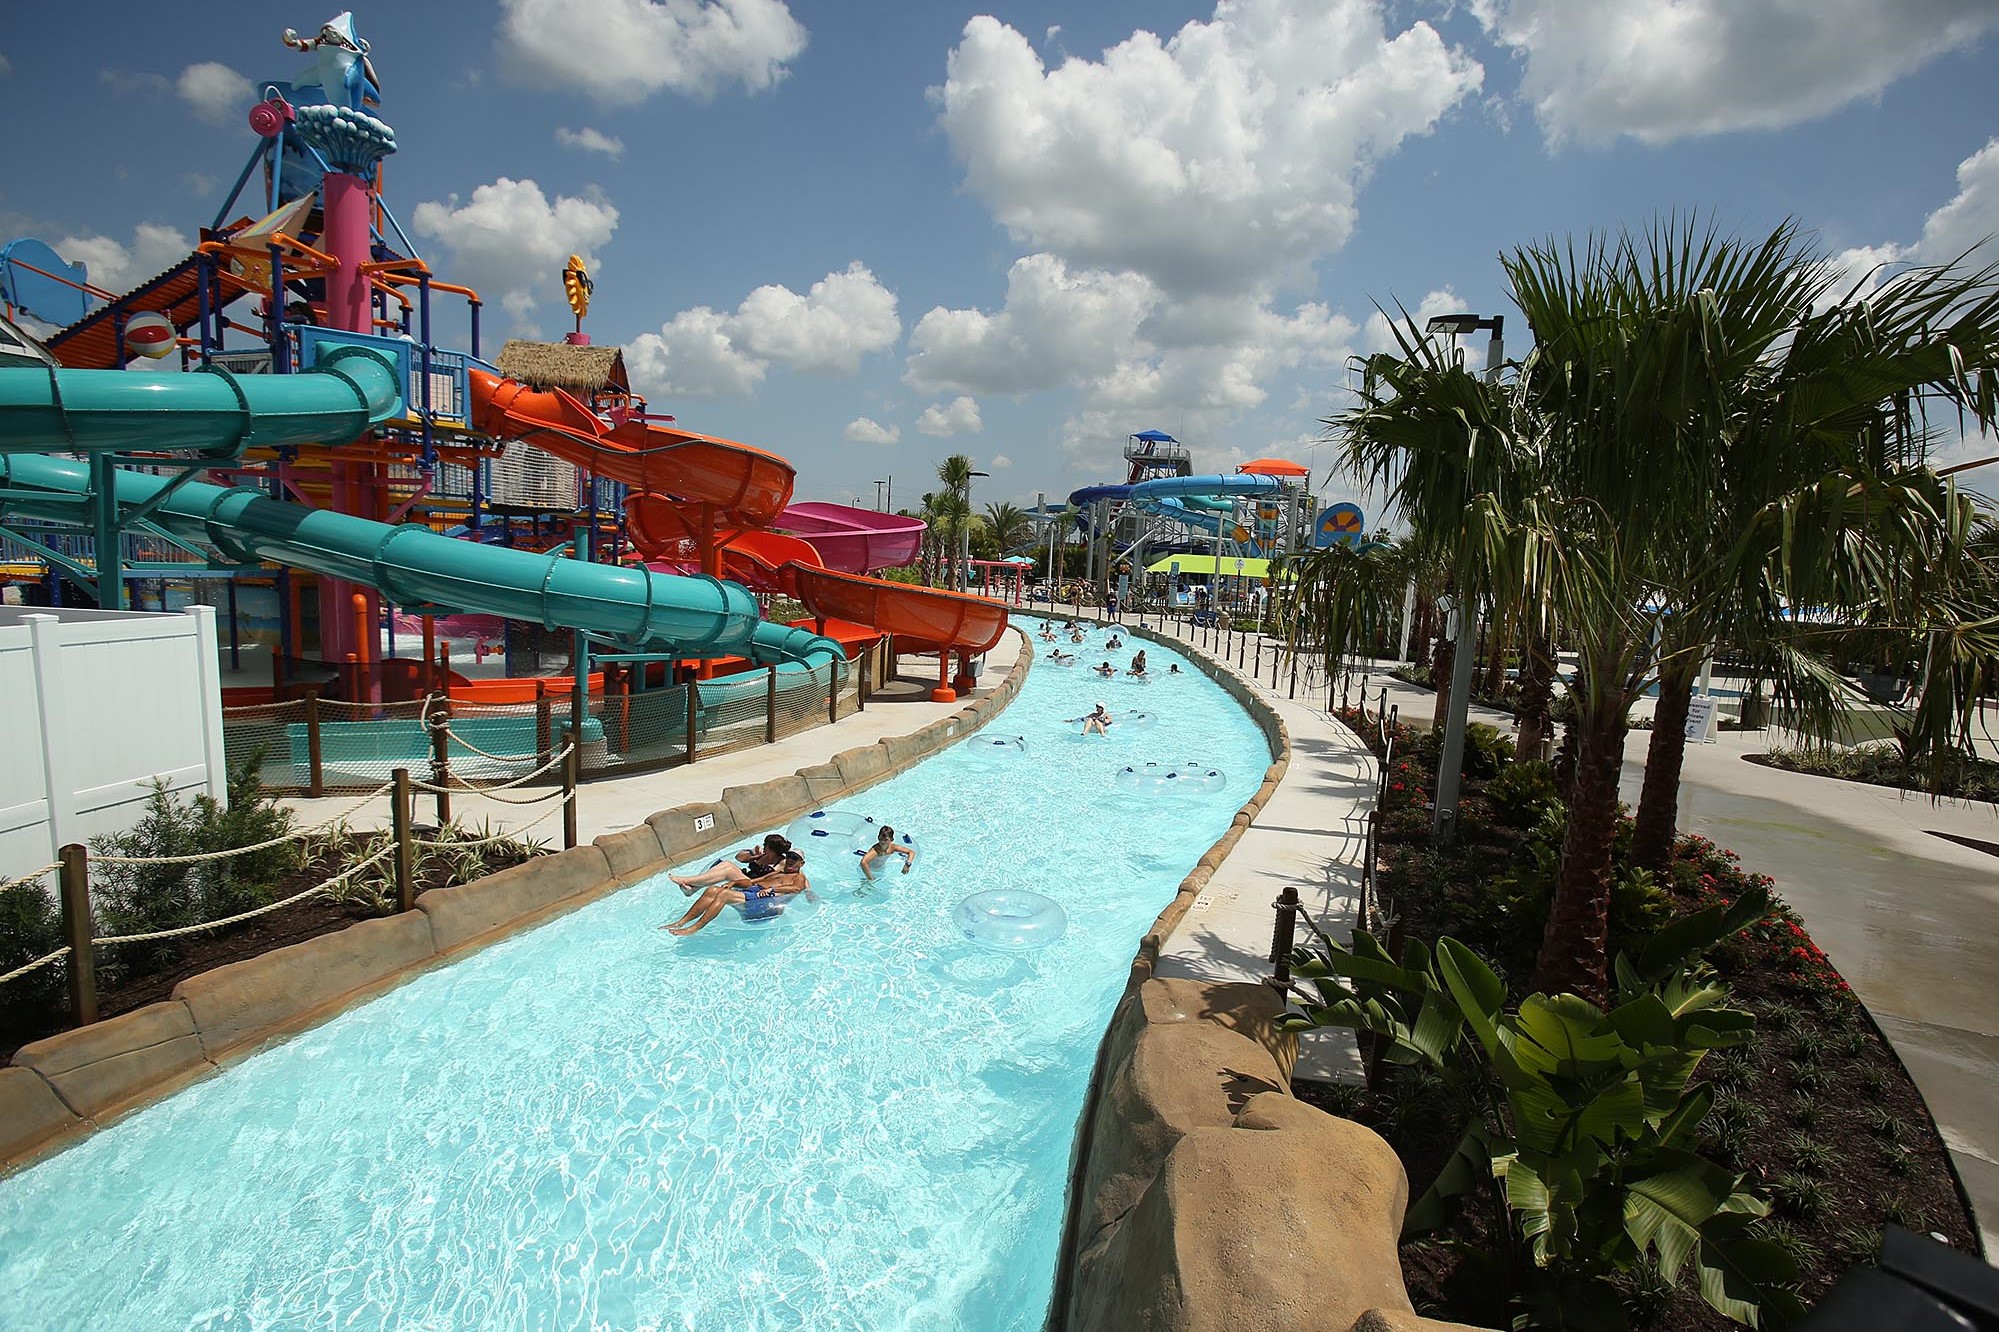 Island H2O Live water park at Margaritaville Resort in Kissimmee